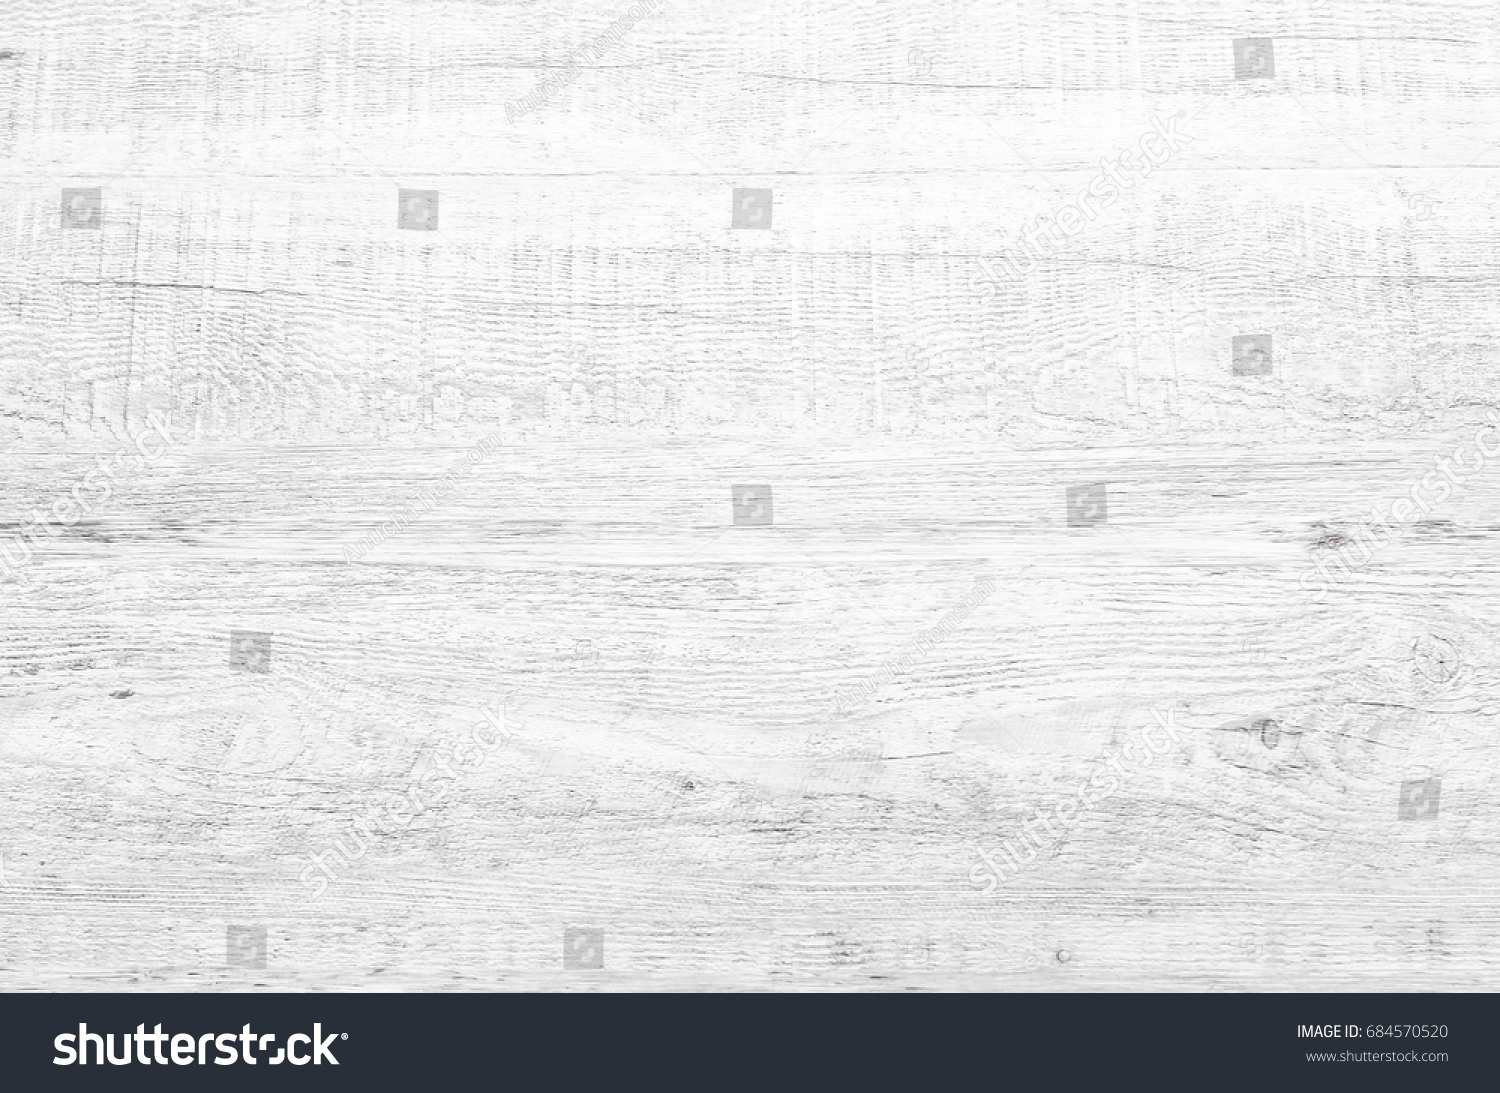 White wood plank texture for background. #684570520